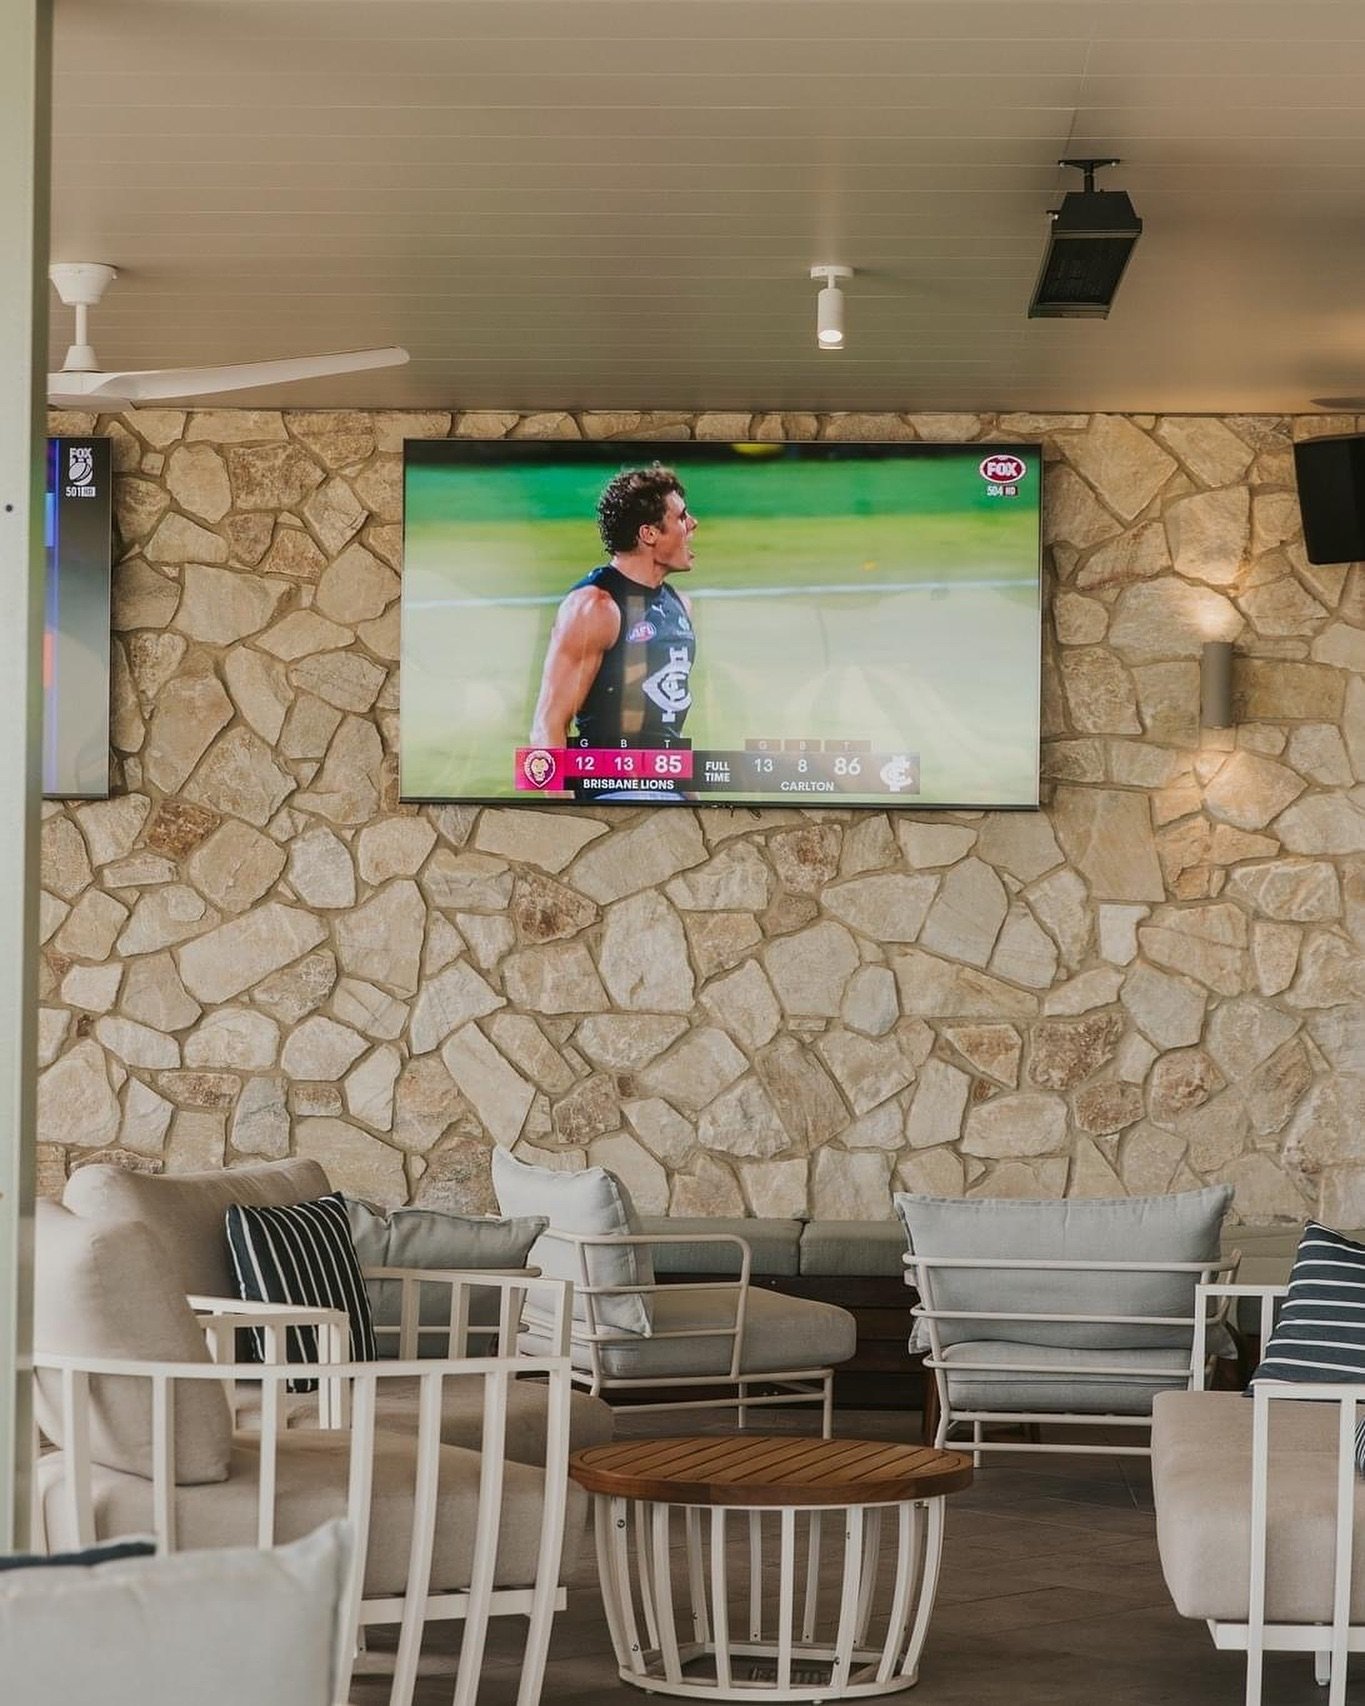 What&rsquo;s on our screens this week? 🤔 Come join us for a big weekend of sports! Will Port take out their first win in Geelong in 17 years? 

Fri 10 May
6:40pm | AFL - Geelong v Port Adelaide
7:15pm | A-League - Syd. FC v C.Coast

Sat 11 May
4:05p